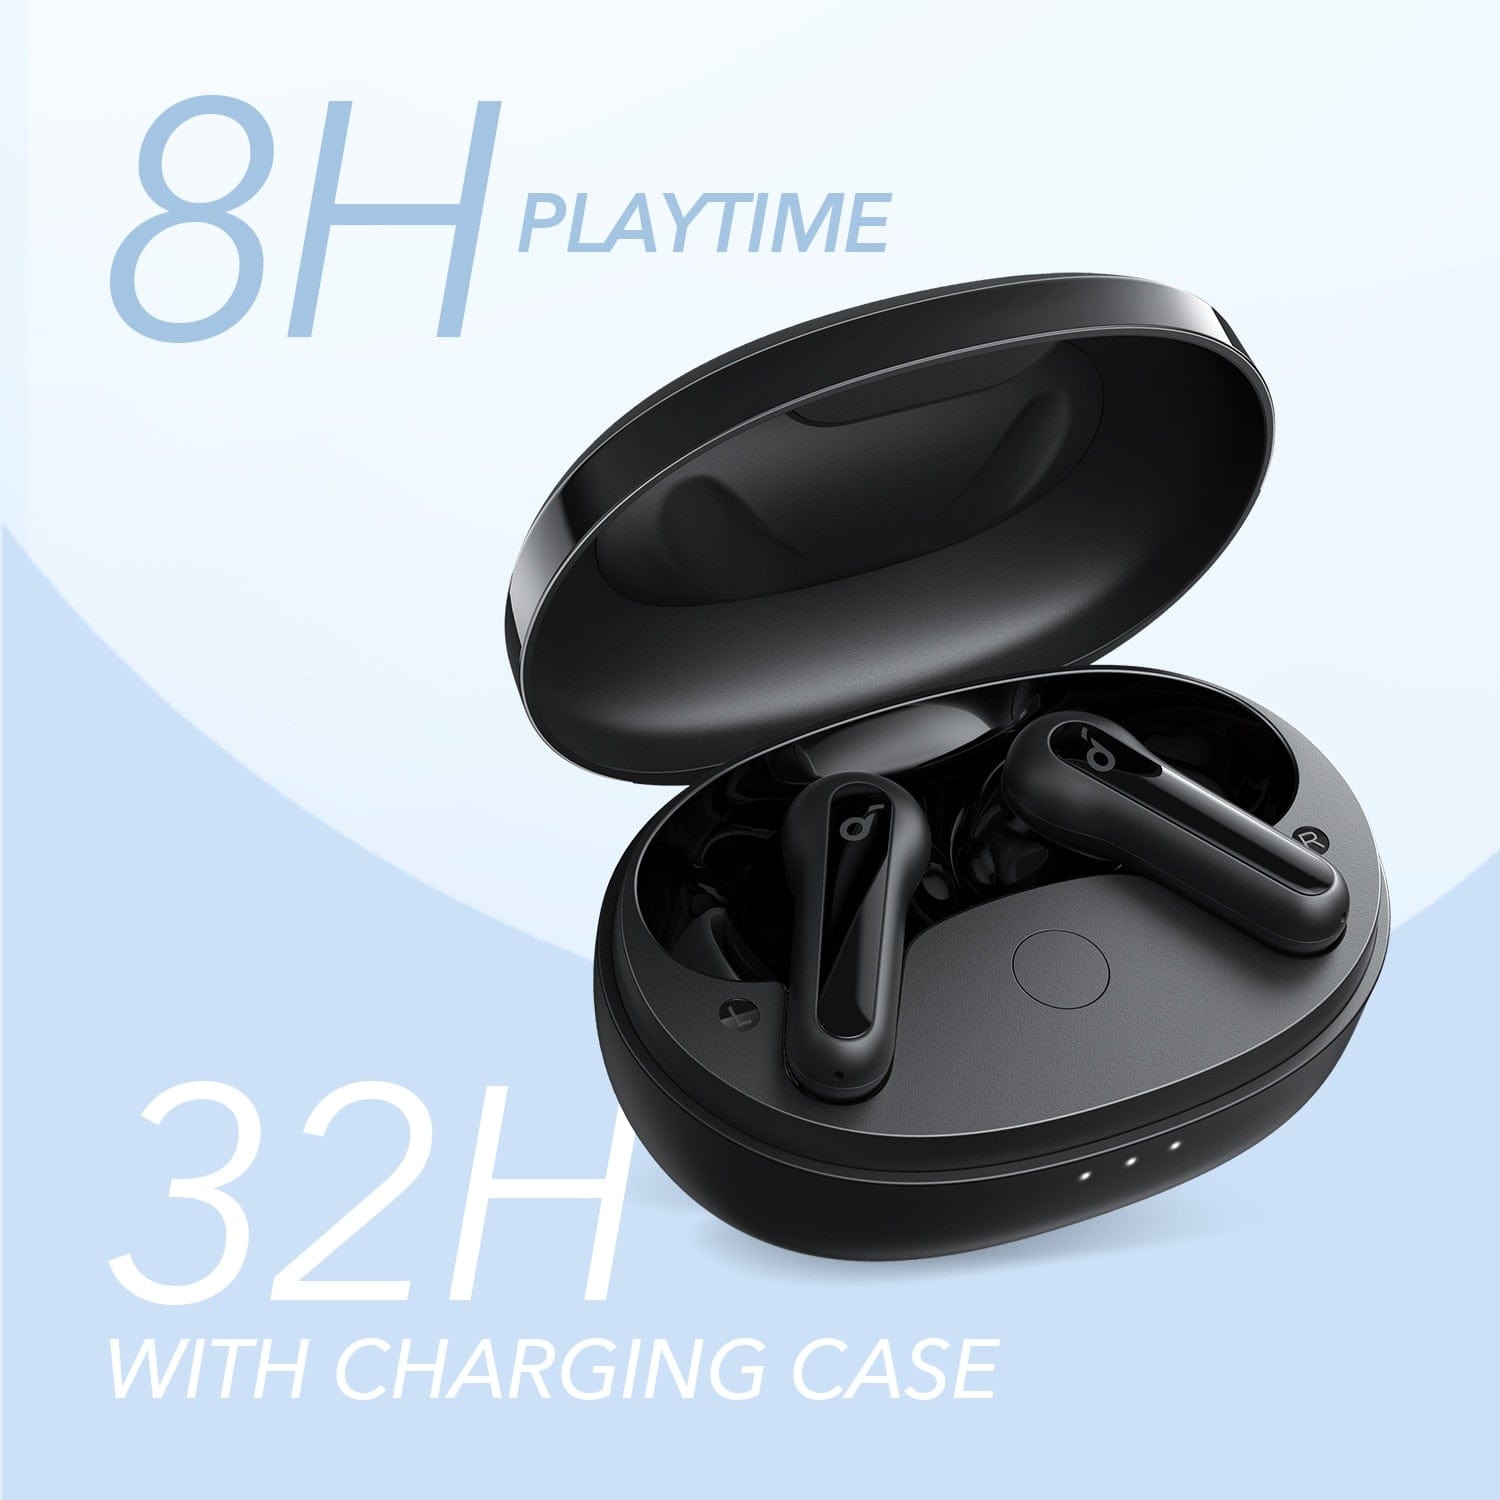 Soundcore Soundcore, Wireless Earbuds, Version Life P2 Mini True, Supports Bluetooth 5.2, Playtime up to 32 Hours, Color White